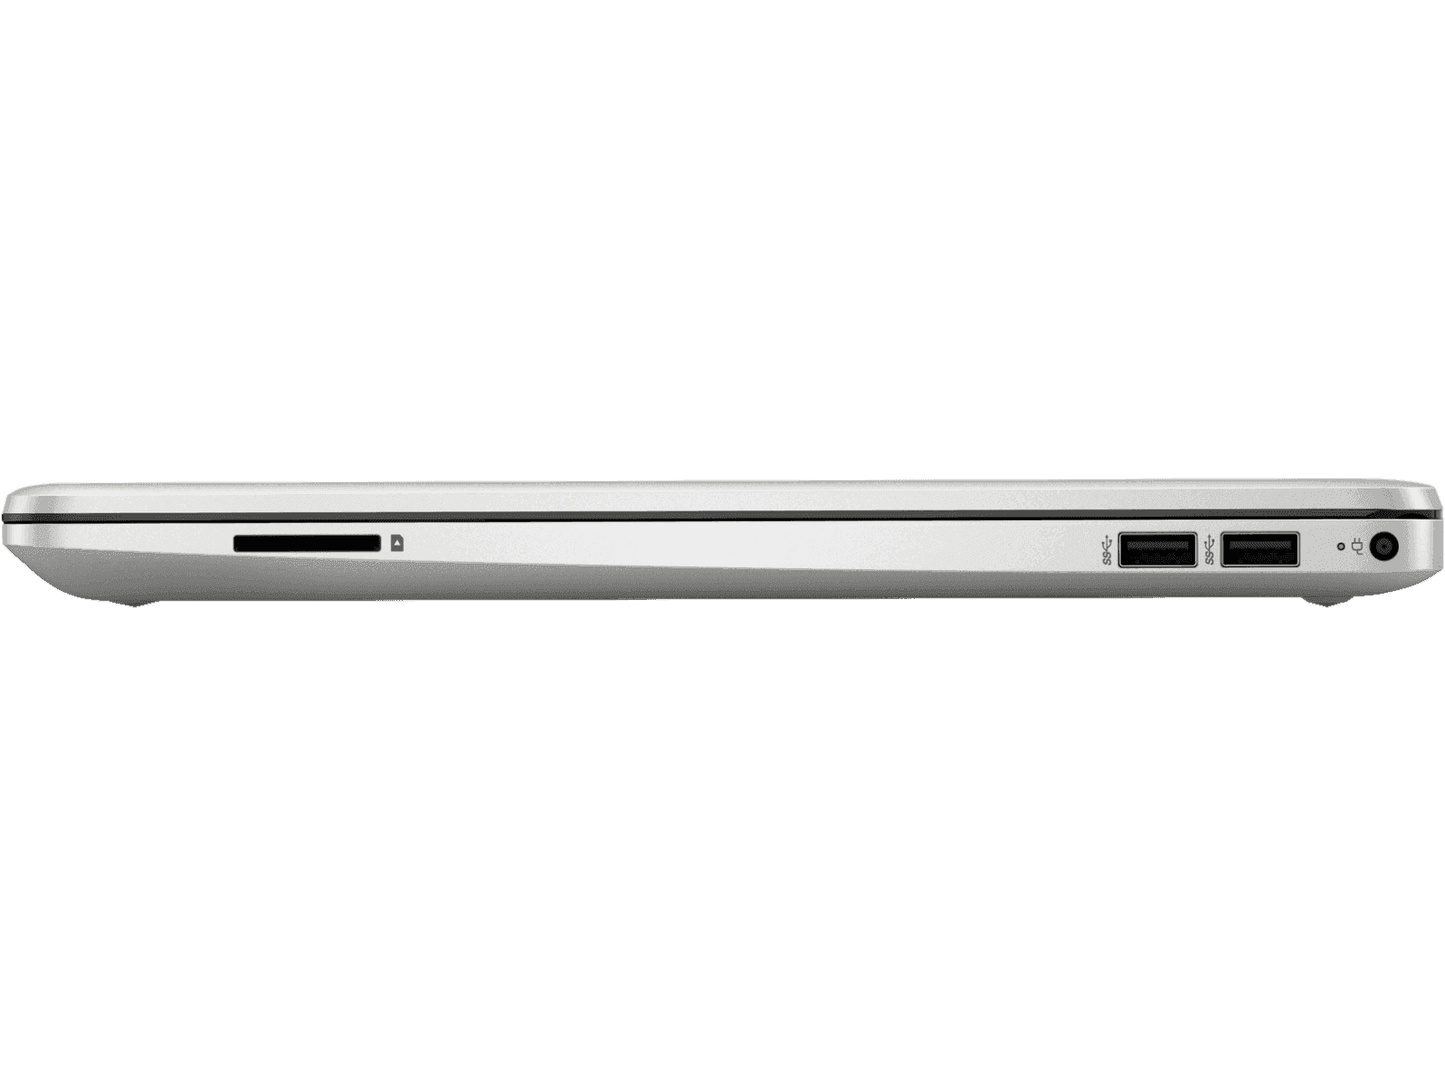 HP 15s Core i5 11th Gen - (8 GB/1 TB HDD/256 GB SSD/Windows 10 Home/2 GB Graphics) 15s-du3047TX Laptop  (15.6 inch, Natural Silver, 1.83 kg, With MS Office)